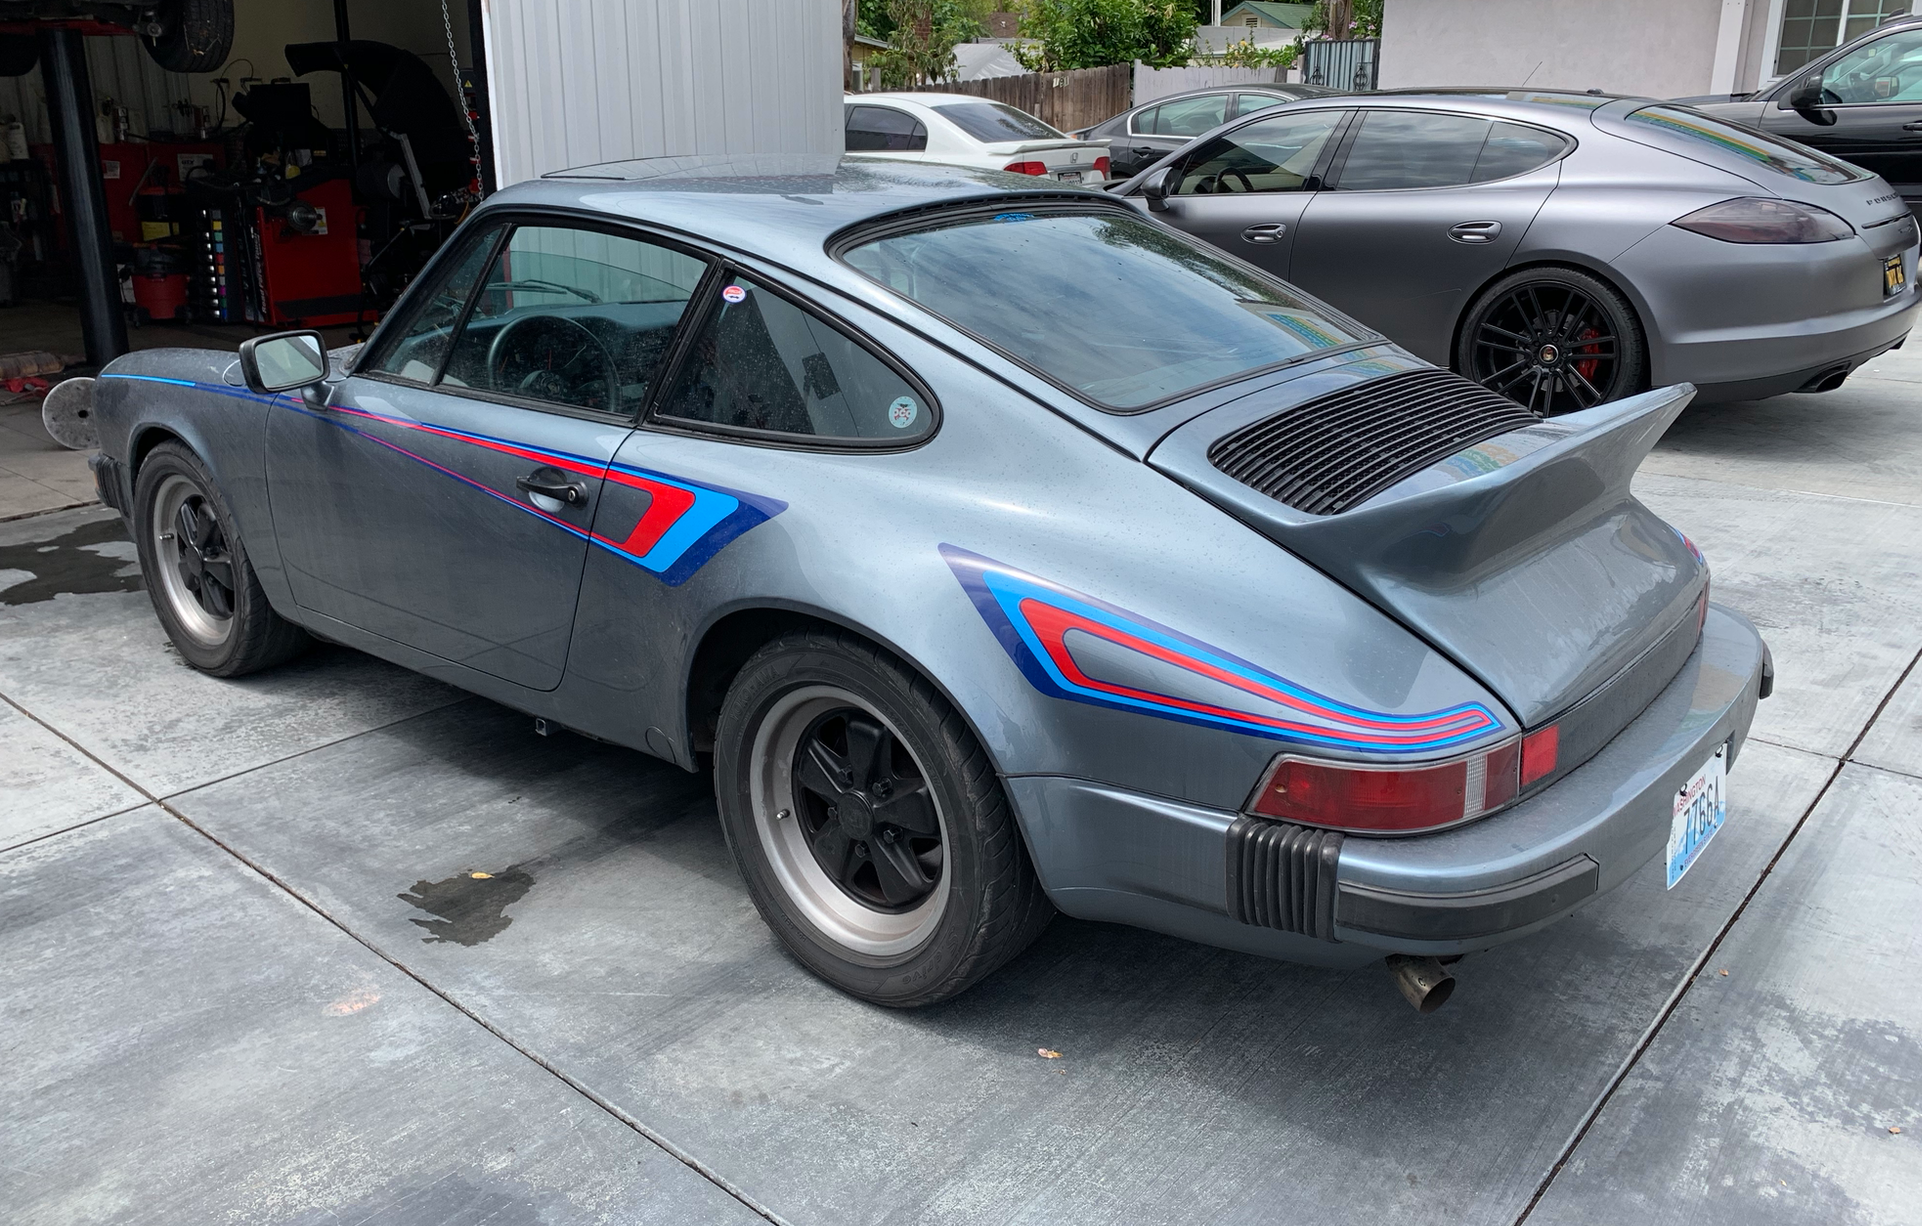 1983 Porsche 911 - 1983 911 SC Slate Blue w Martini Stripes - Used - VIN WP0AA0916DS121820 - 186,000 Miles - 6 cyl - 2WD - Manual - San Francisco, CA 94103, United States